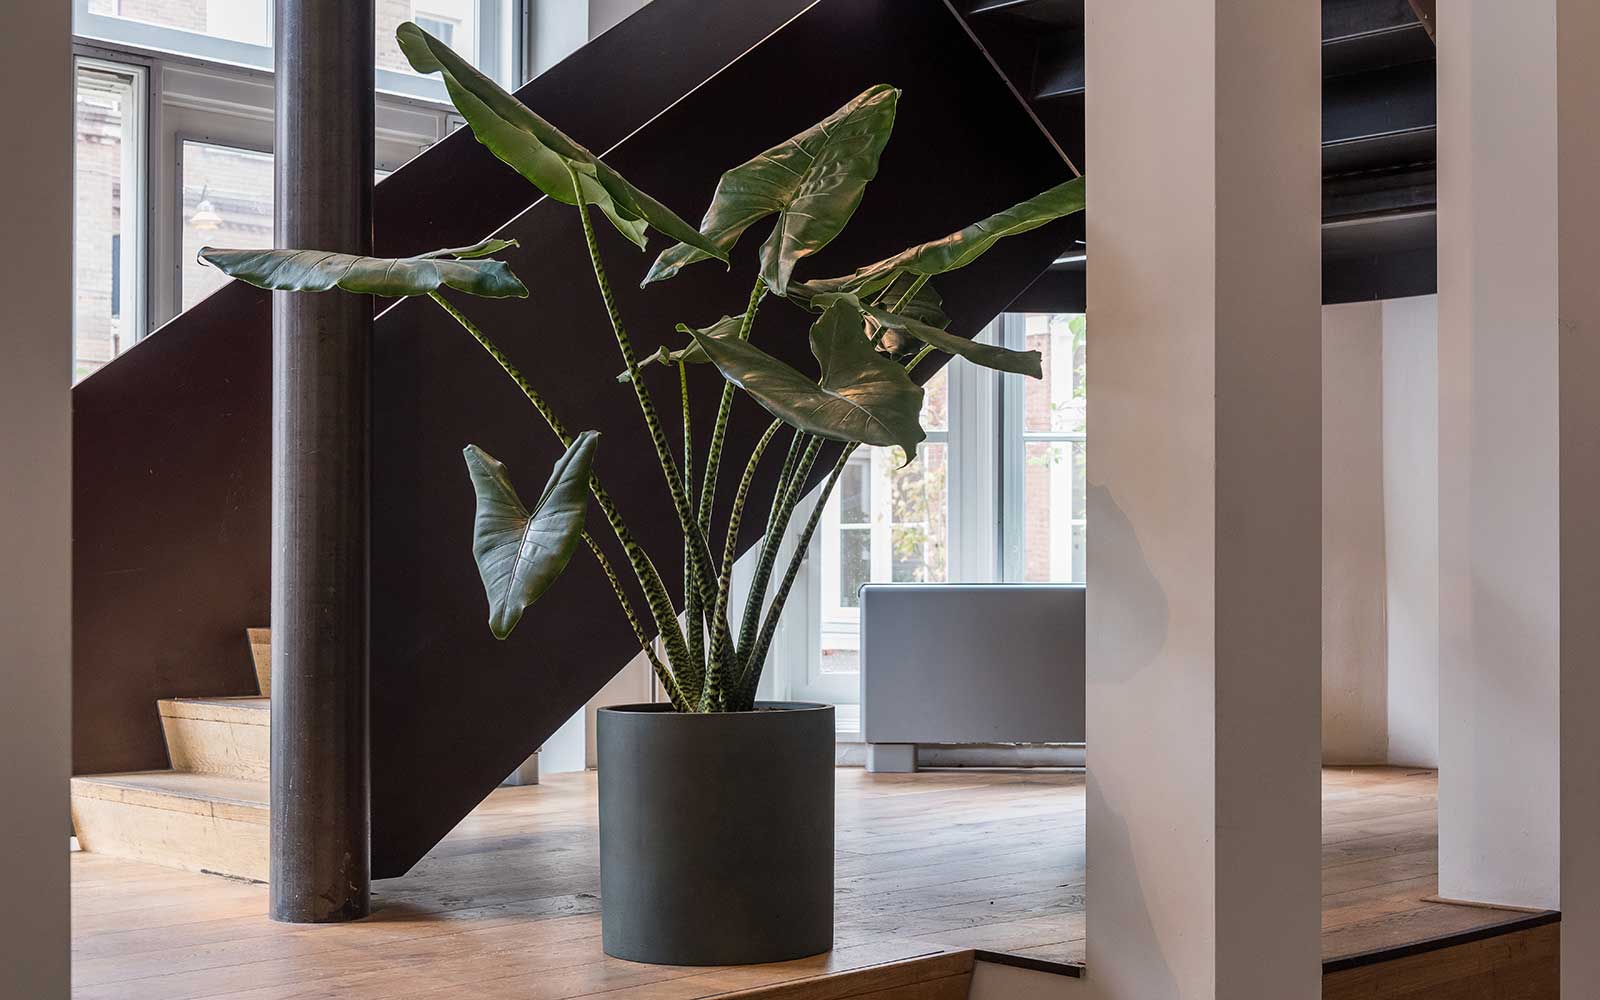 Buy quality assured houseplants online from Hortology, the UK’s favourite plant shop. Large & tall indoor plants, plant pots & planters for every setting. Shop wellbeing houseplant style to create your perfect urban jungle.